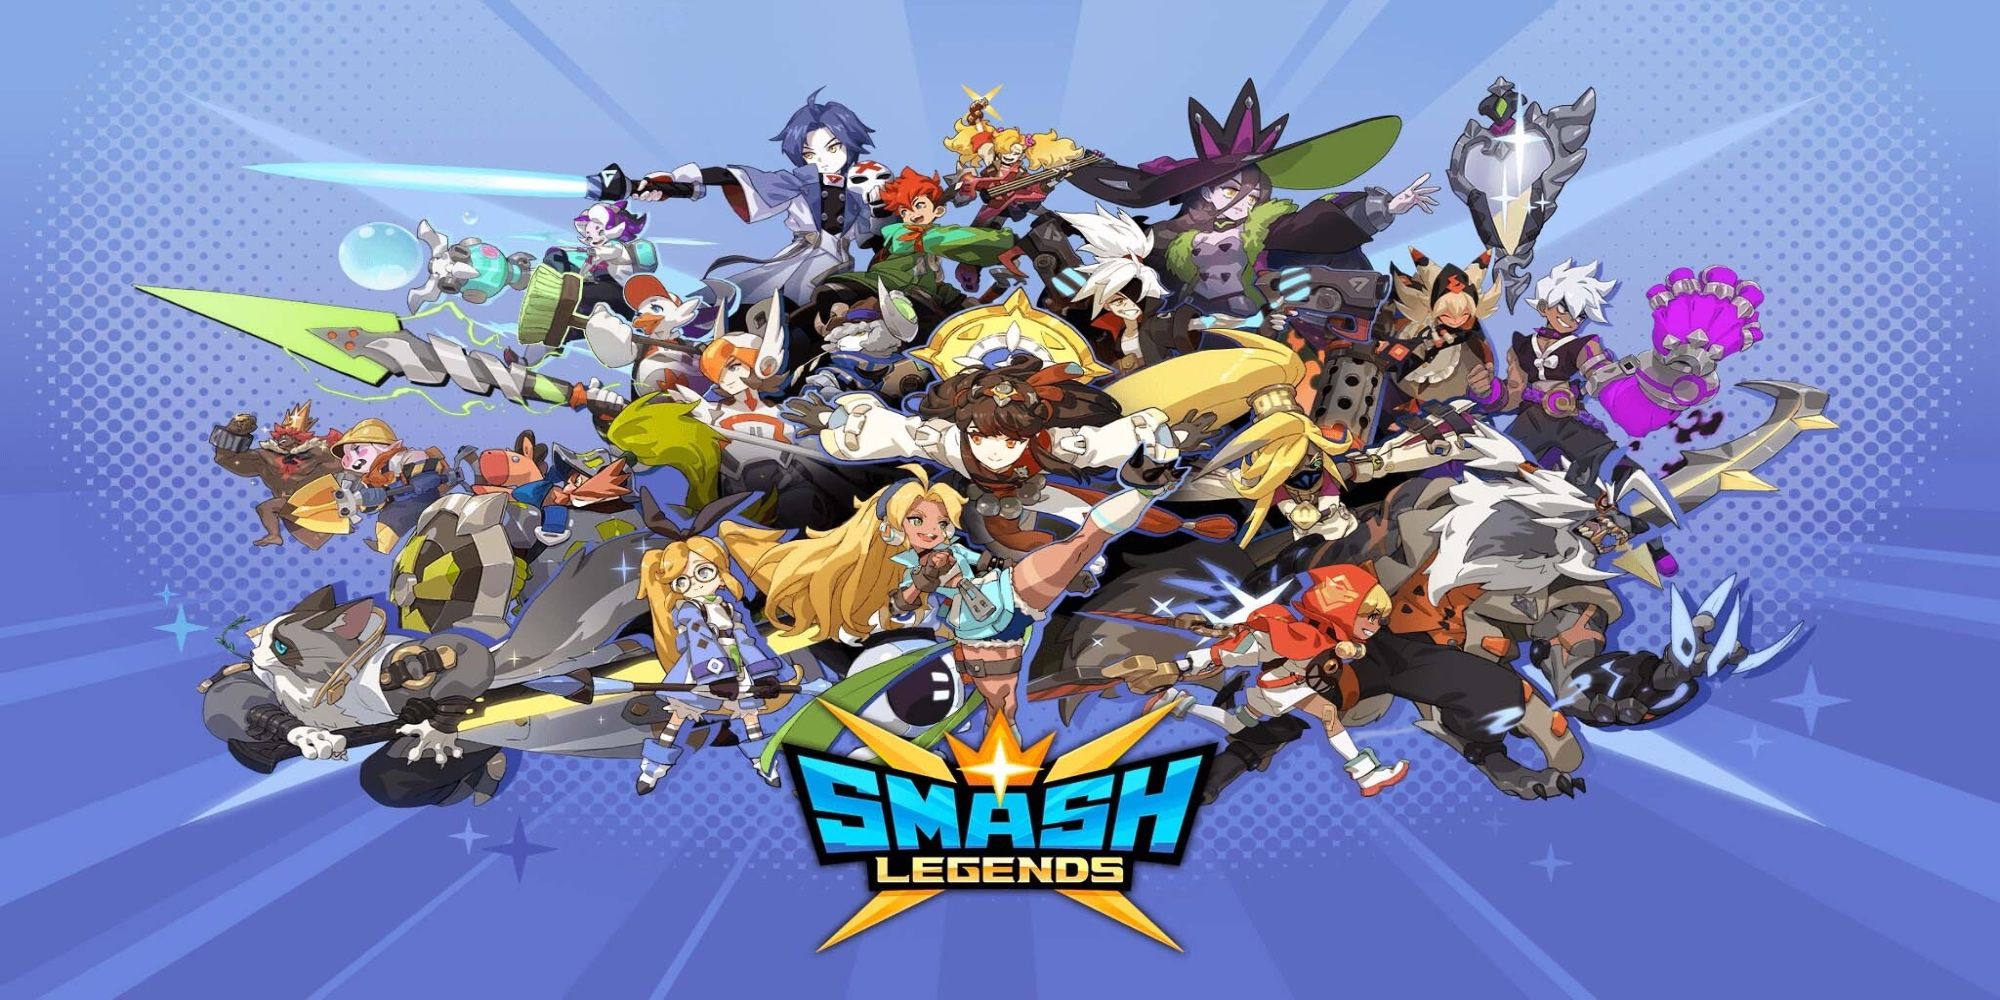 Characters of Smash Legends prepare for a brawl